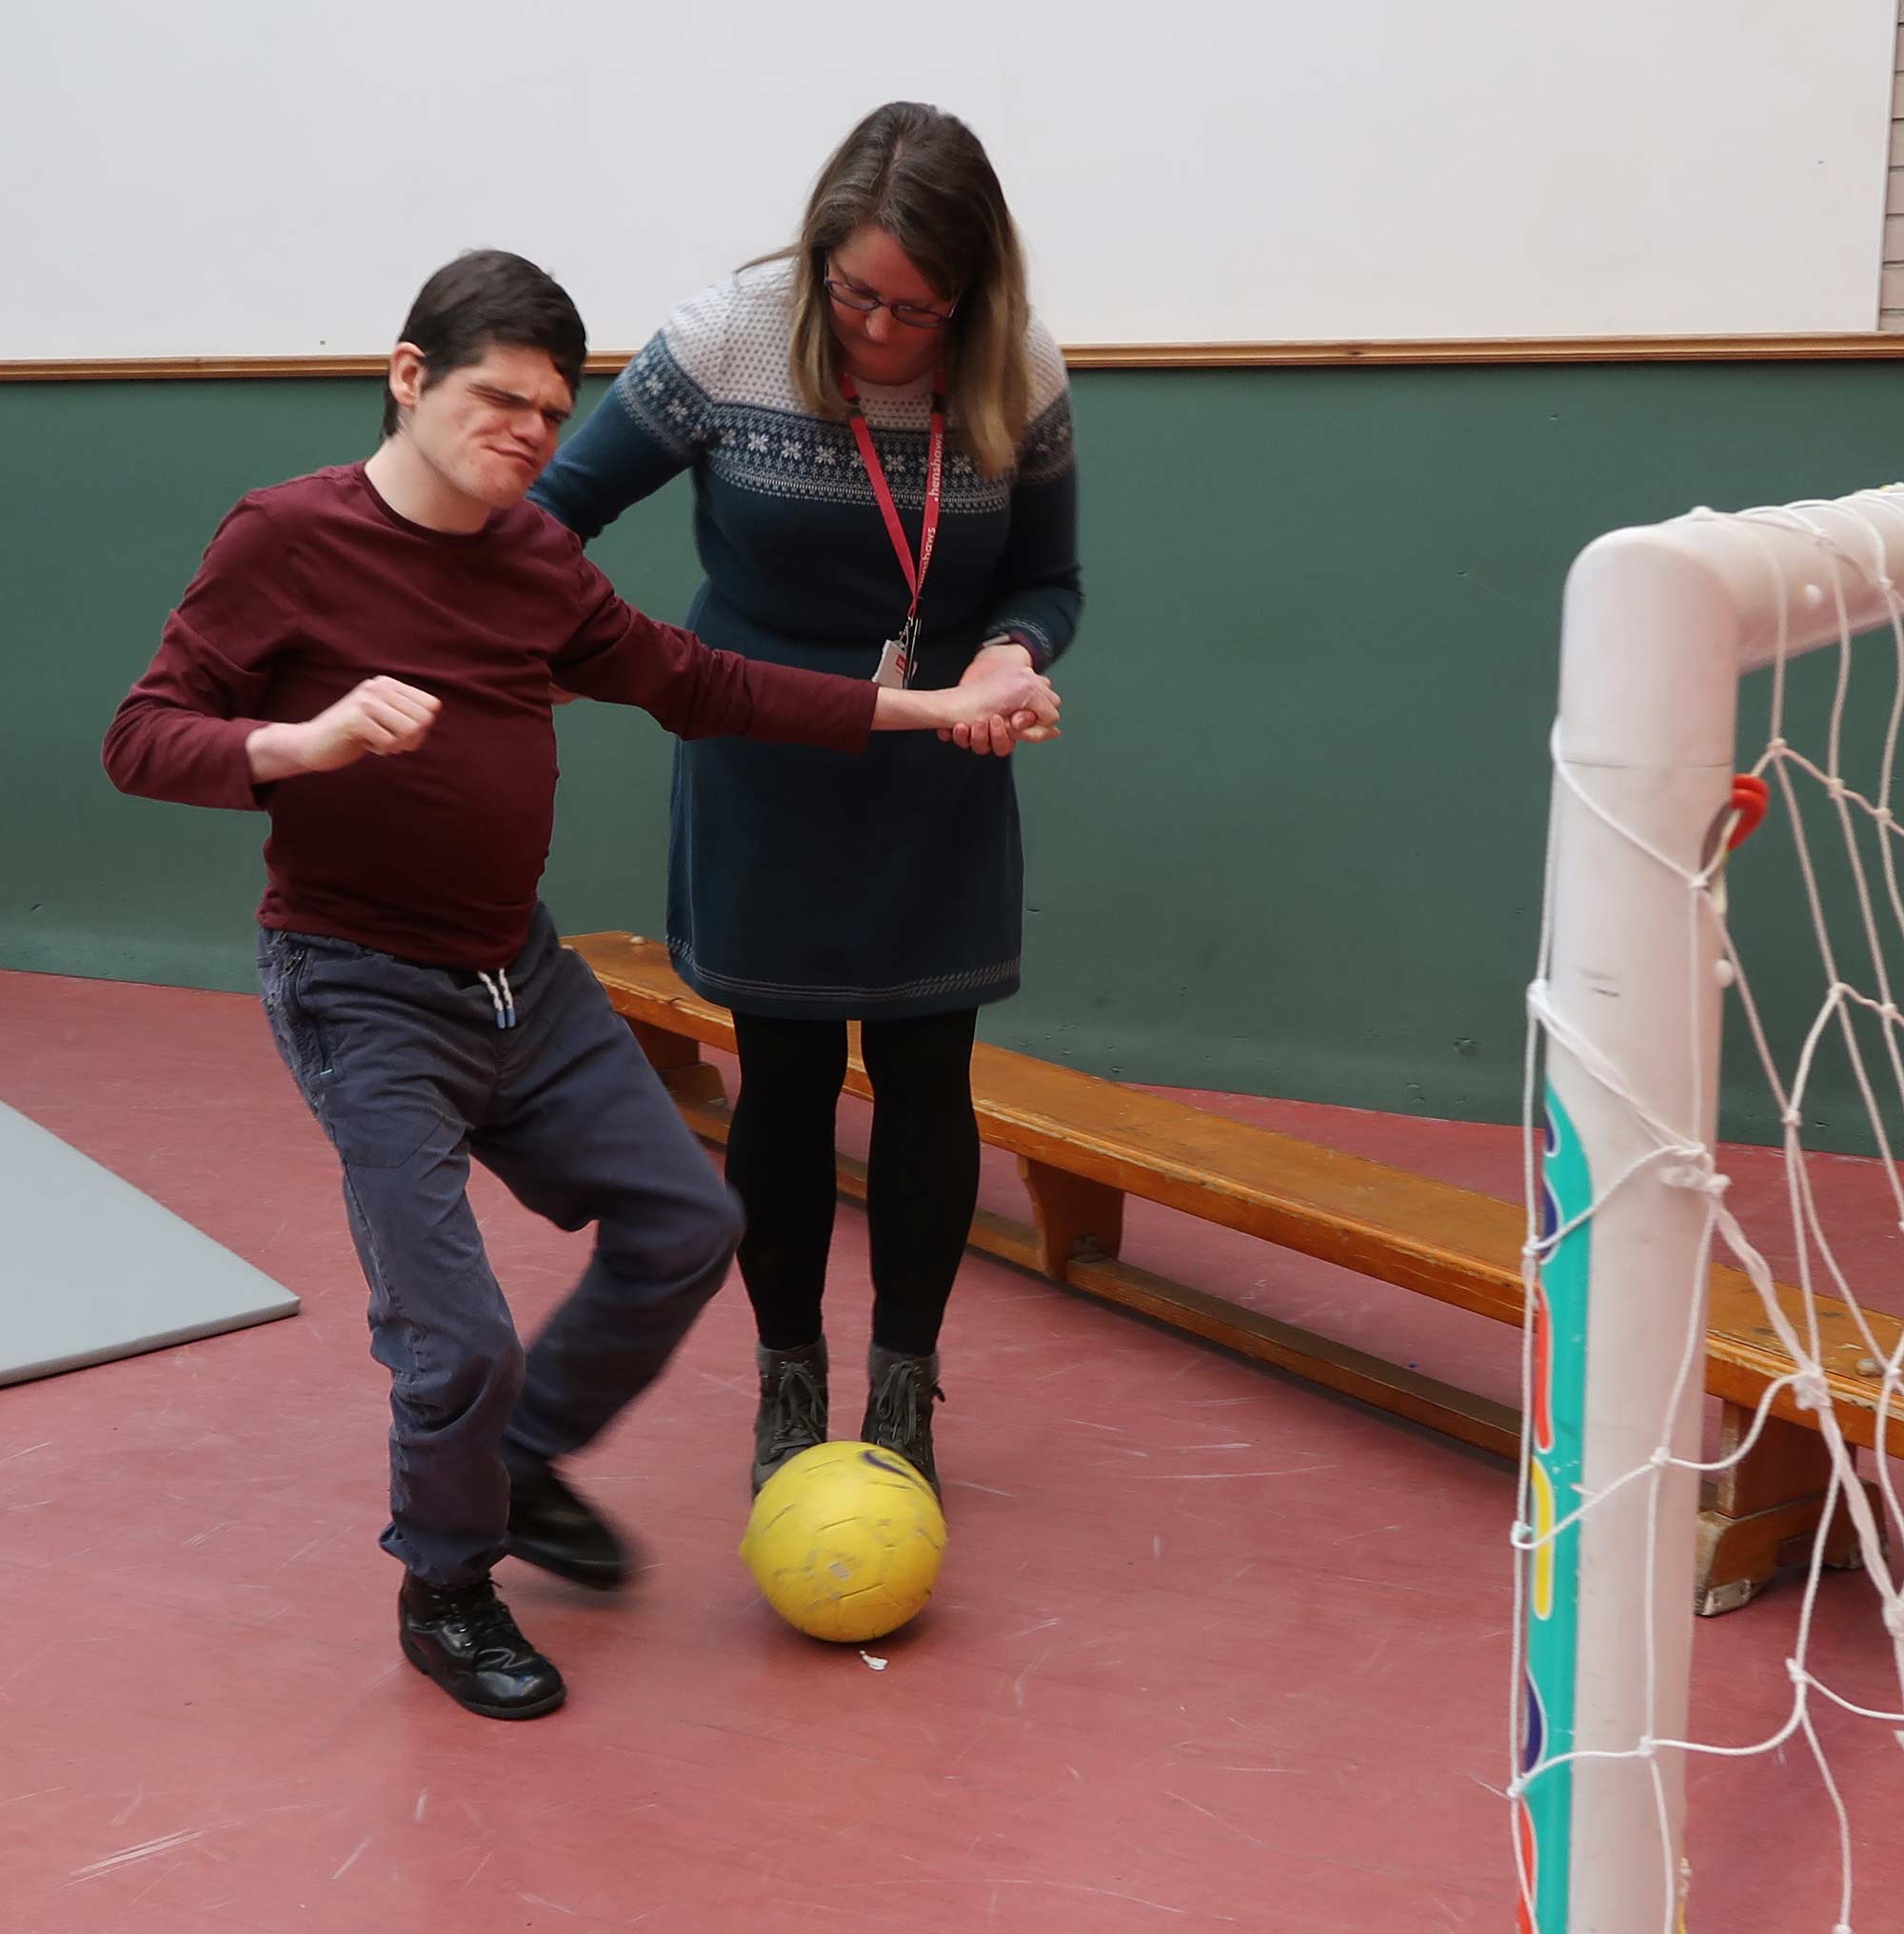 Student Andrew Fletcher who has been working on rolling a ball goes for goal with the help of Johanne* Dodsworth